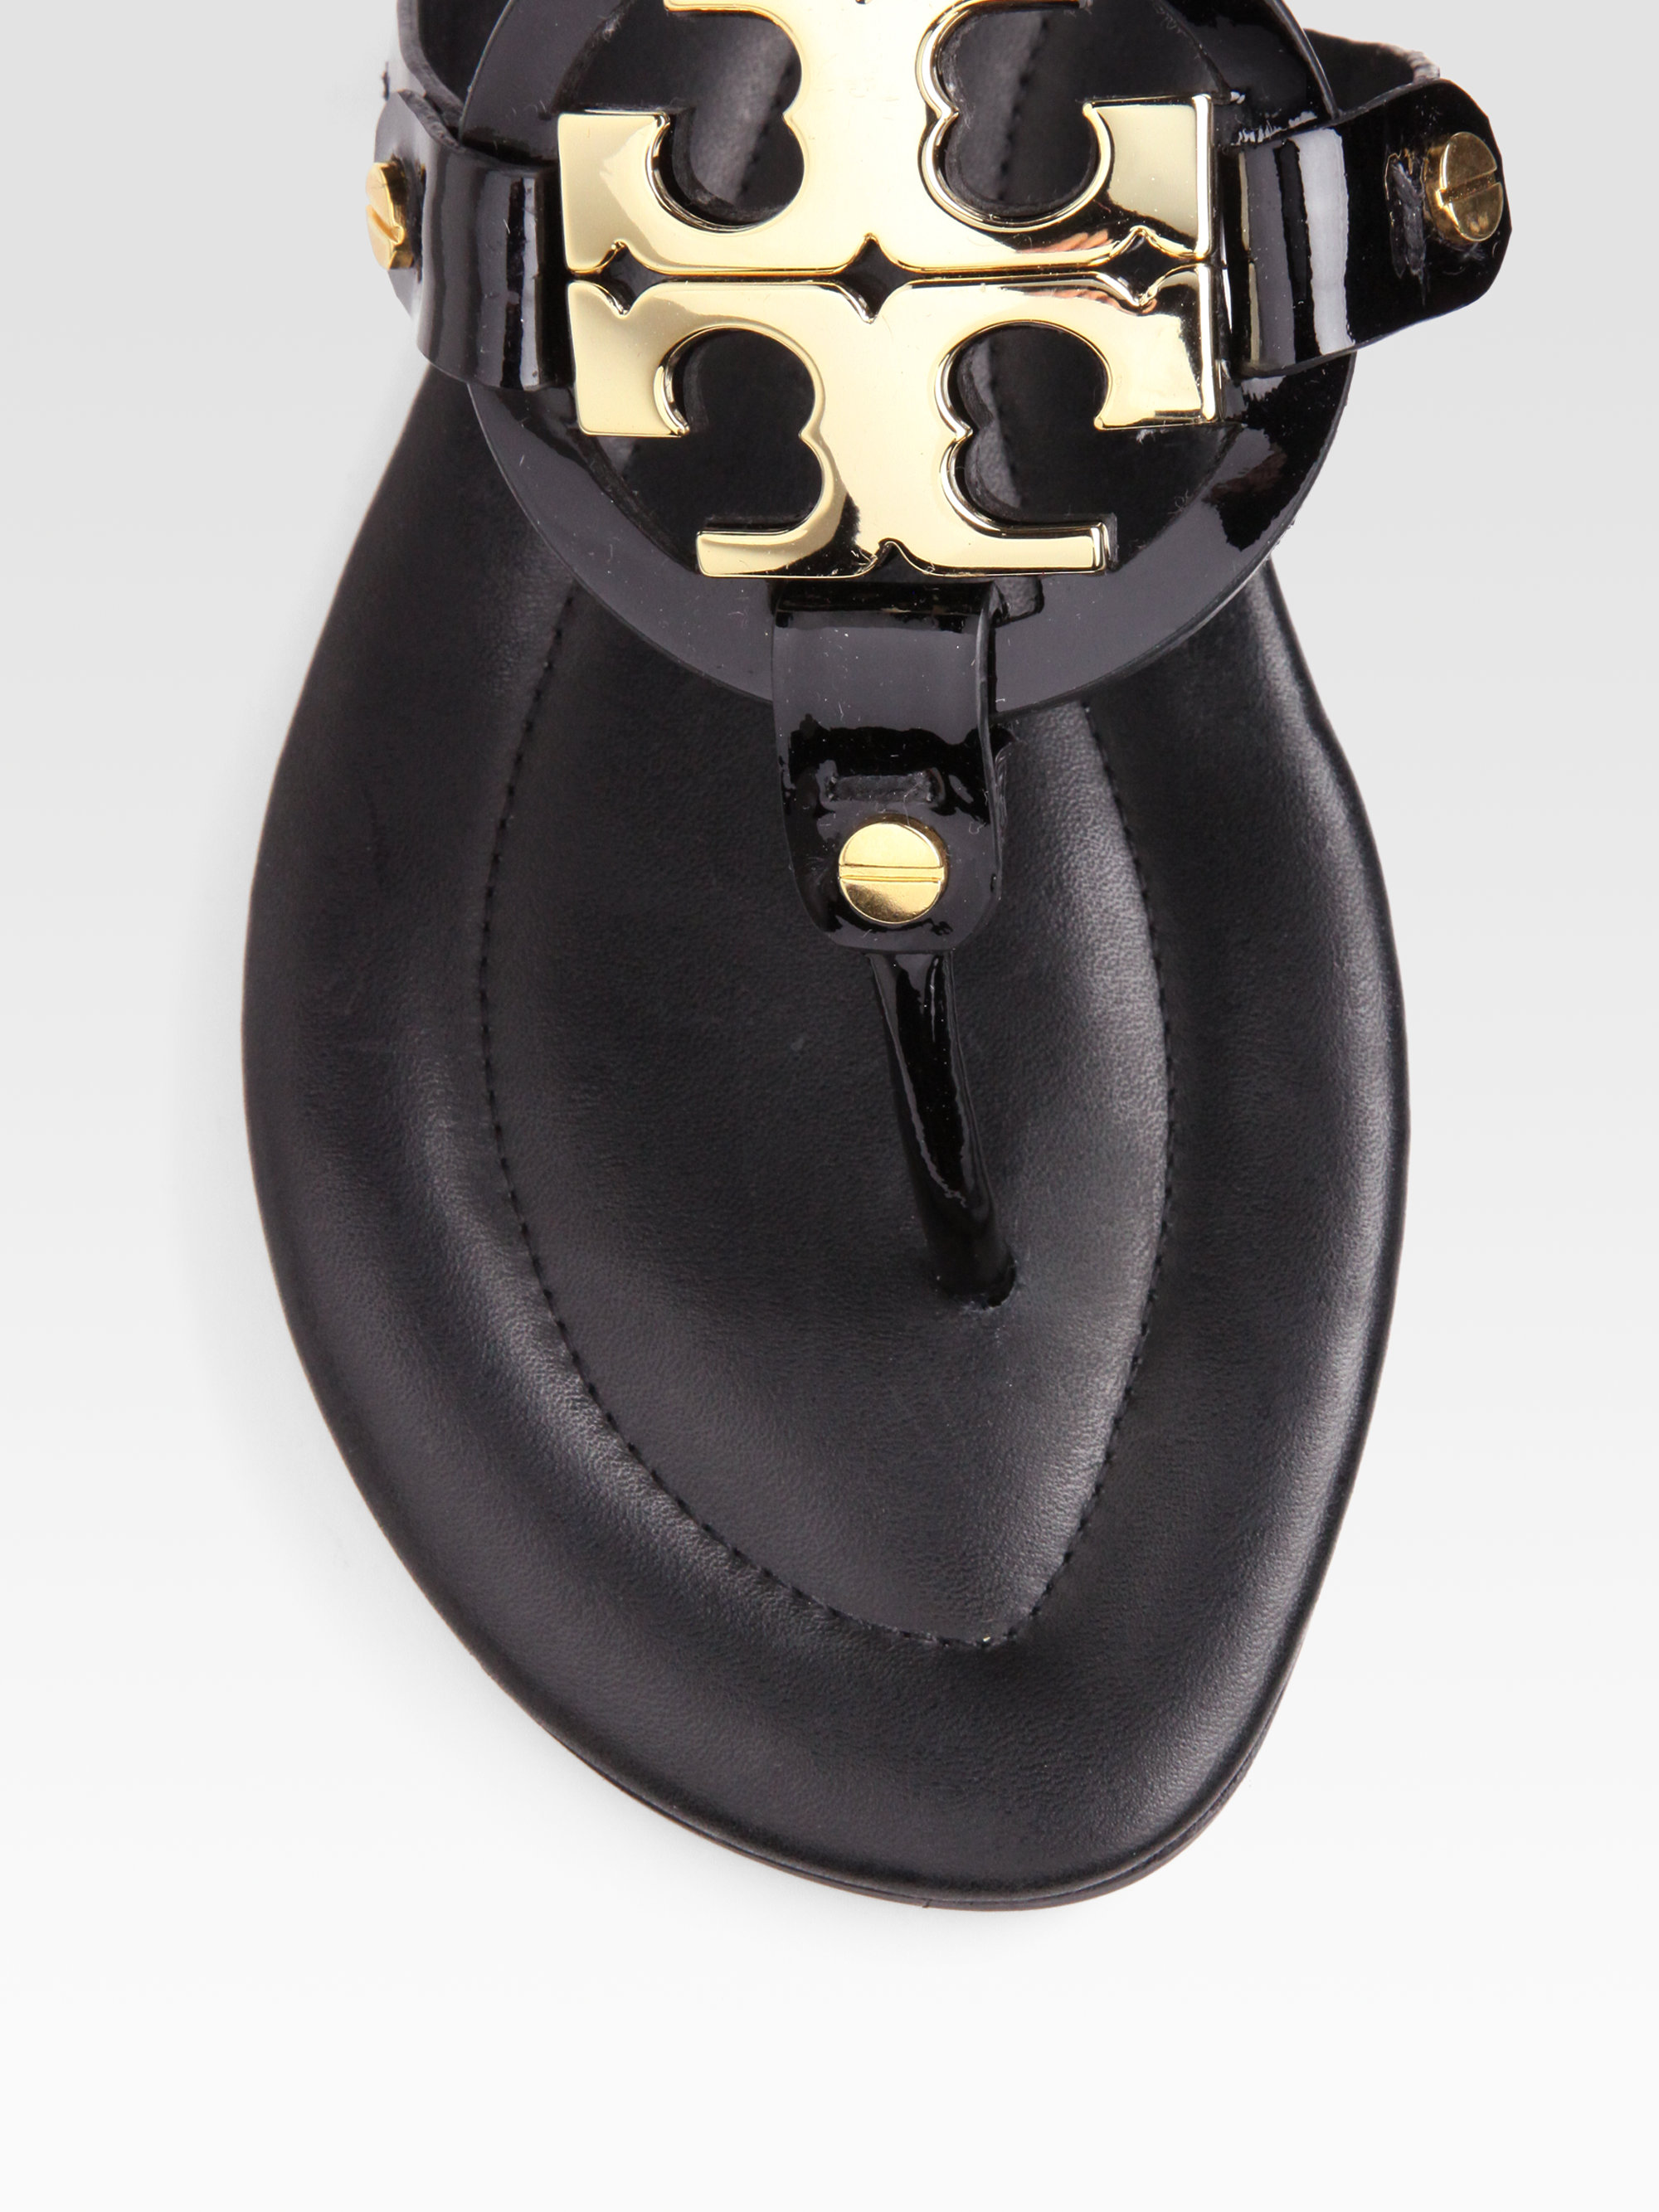 tory burch sandals black and gold